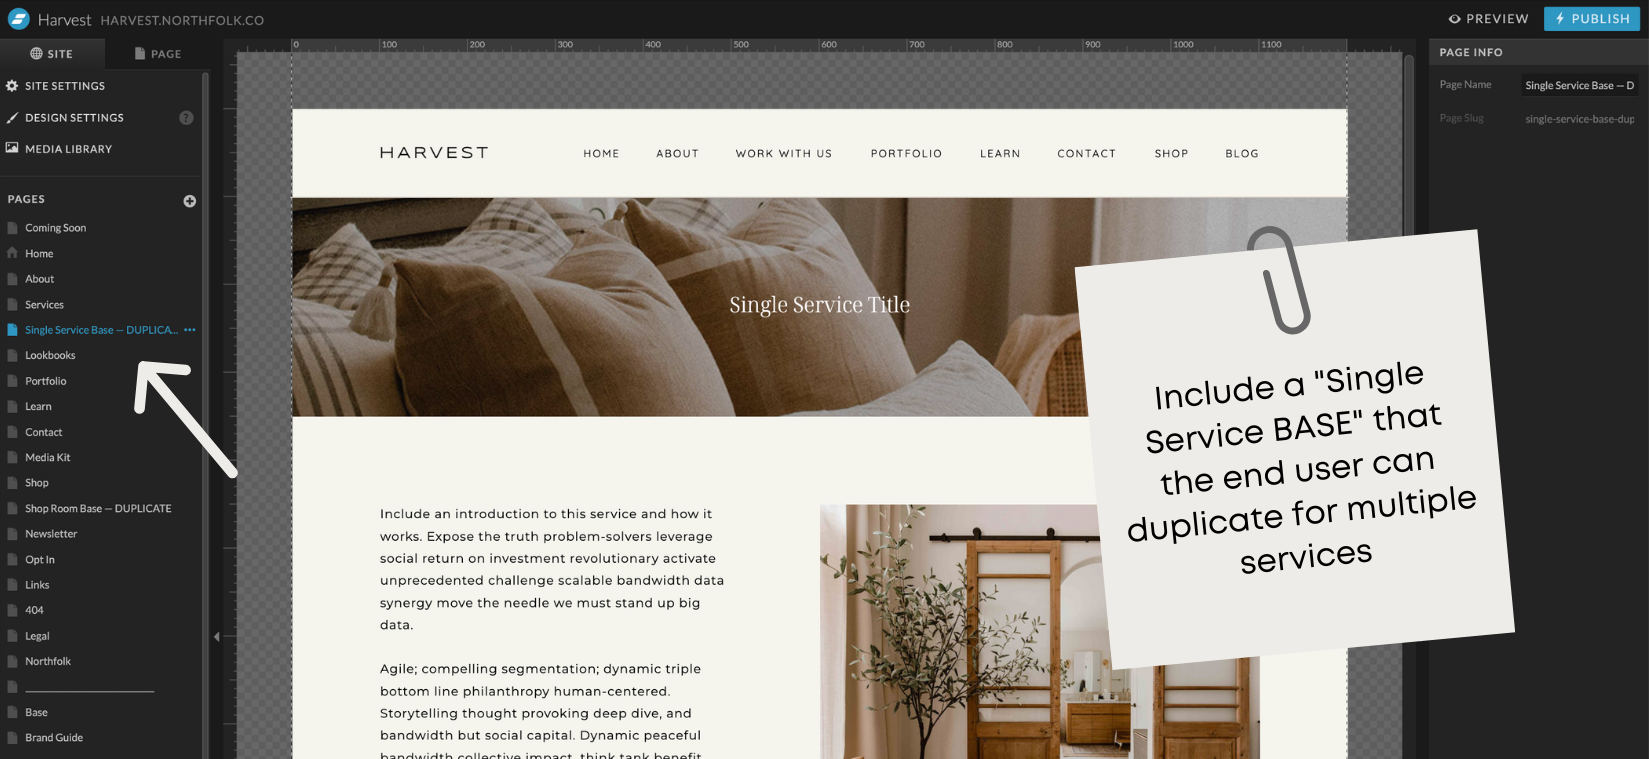 Base pages for Showit templates